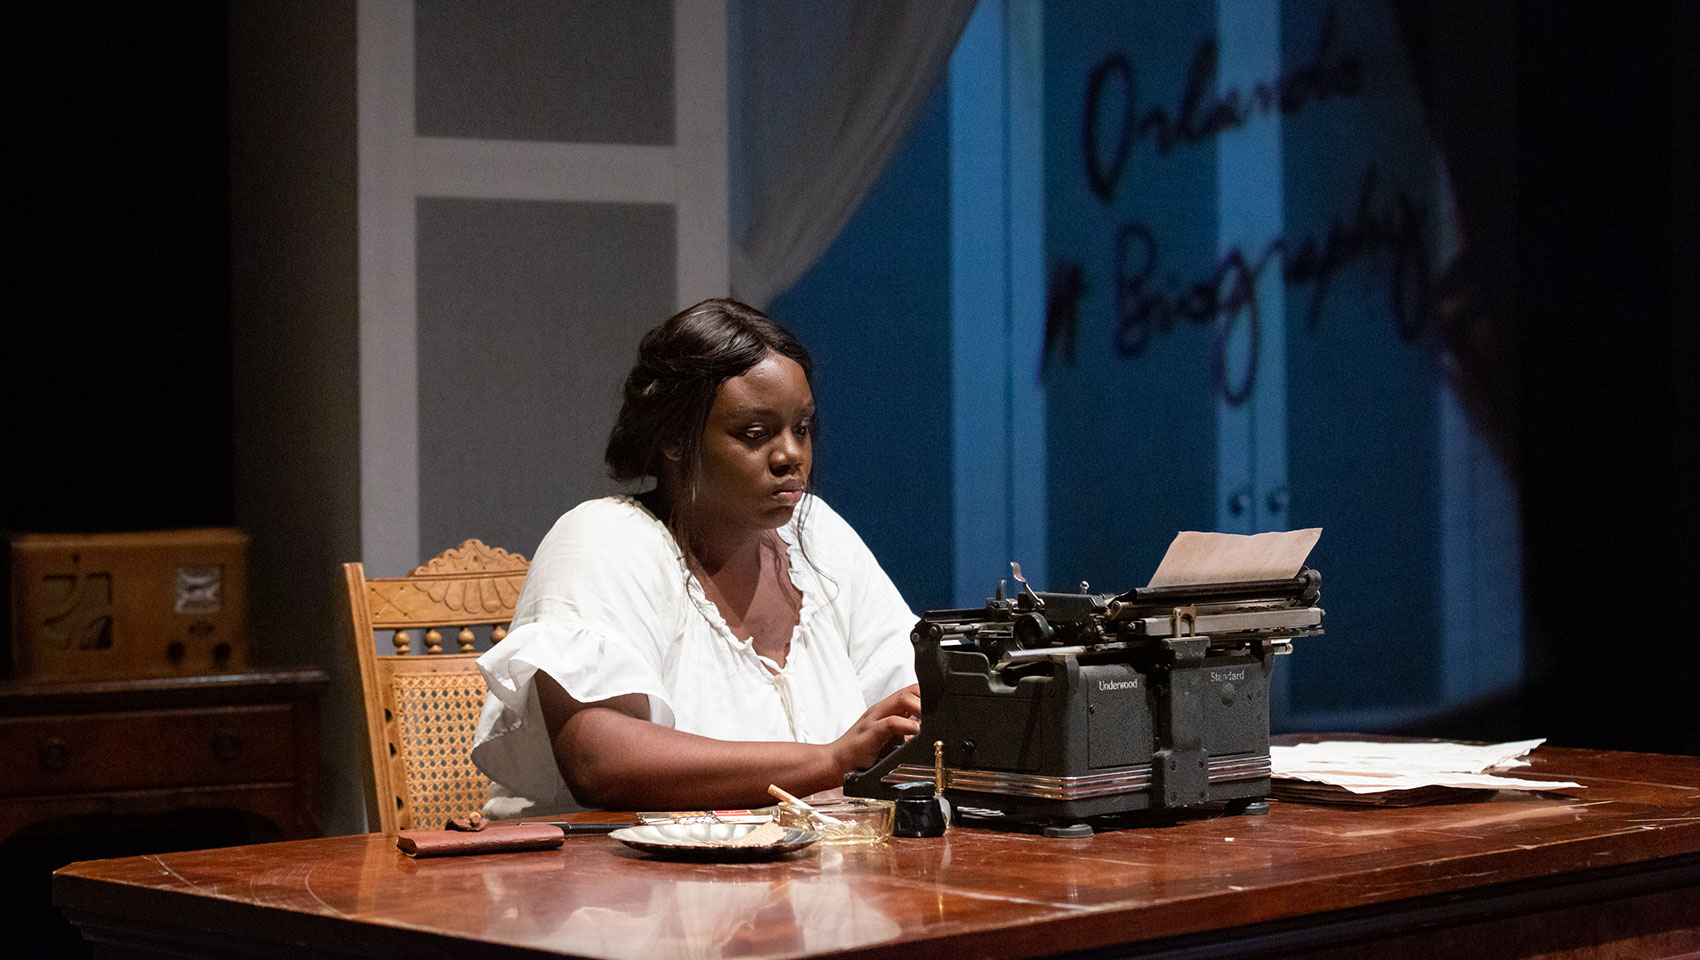 A Black woman sits alone typing something using a typewriter, her face serious as if she is thinking carefully. 